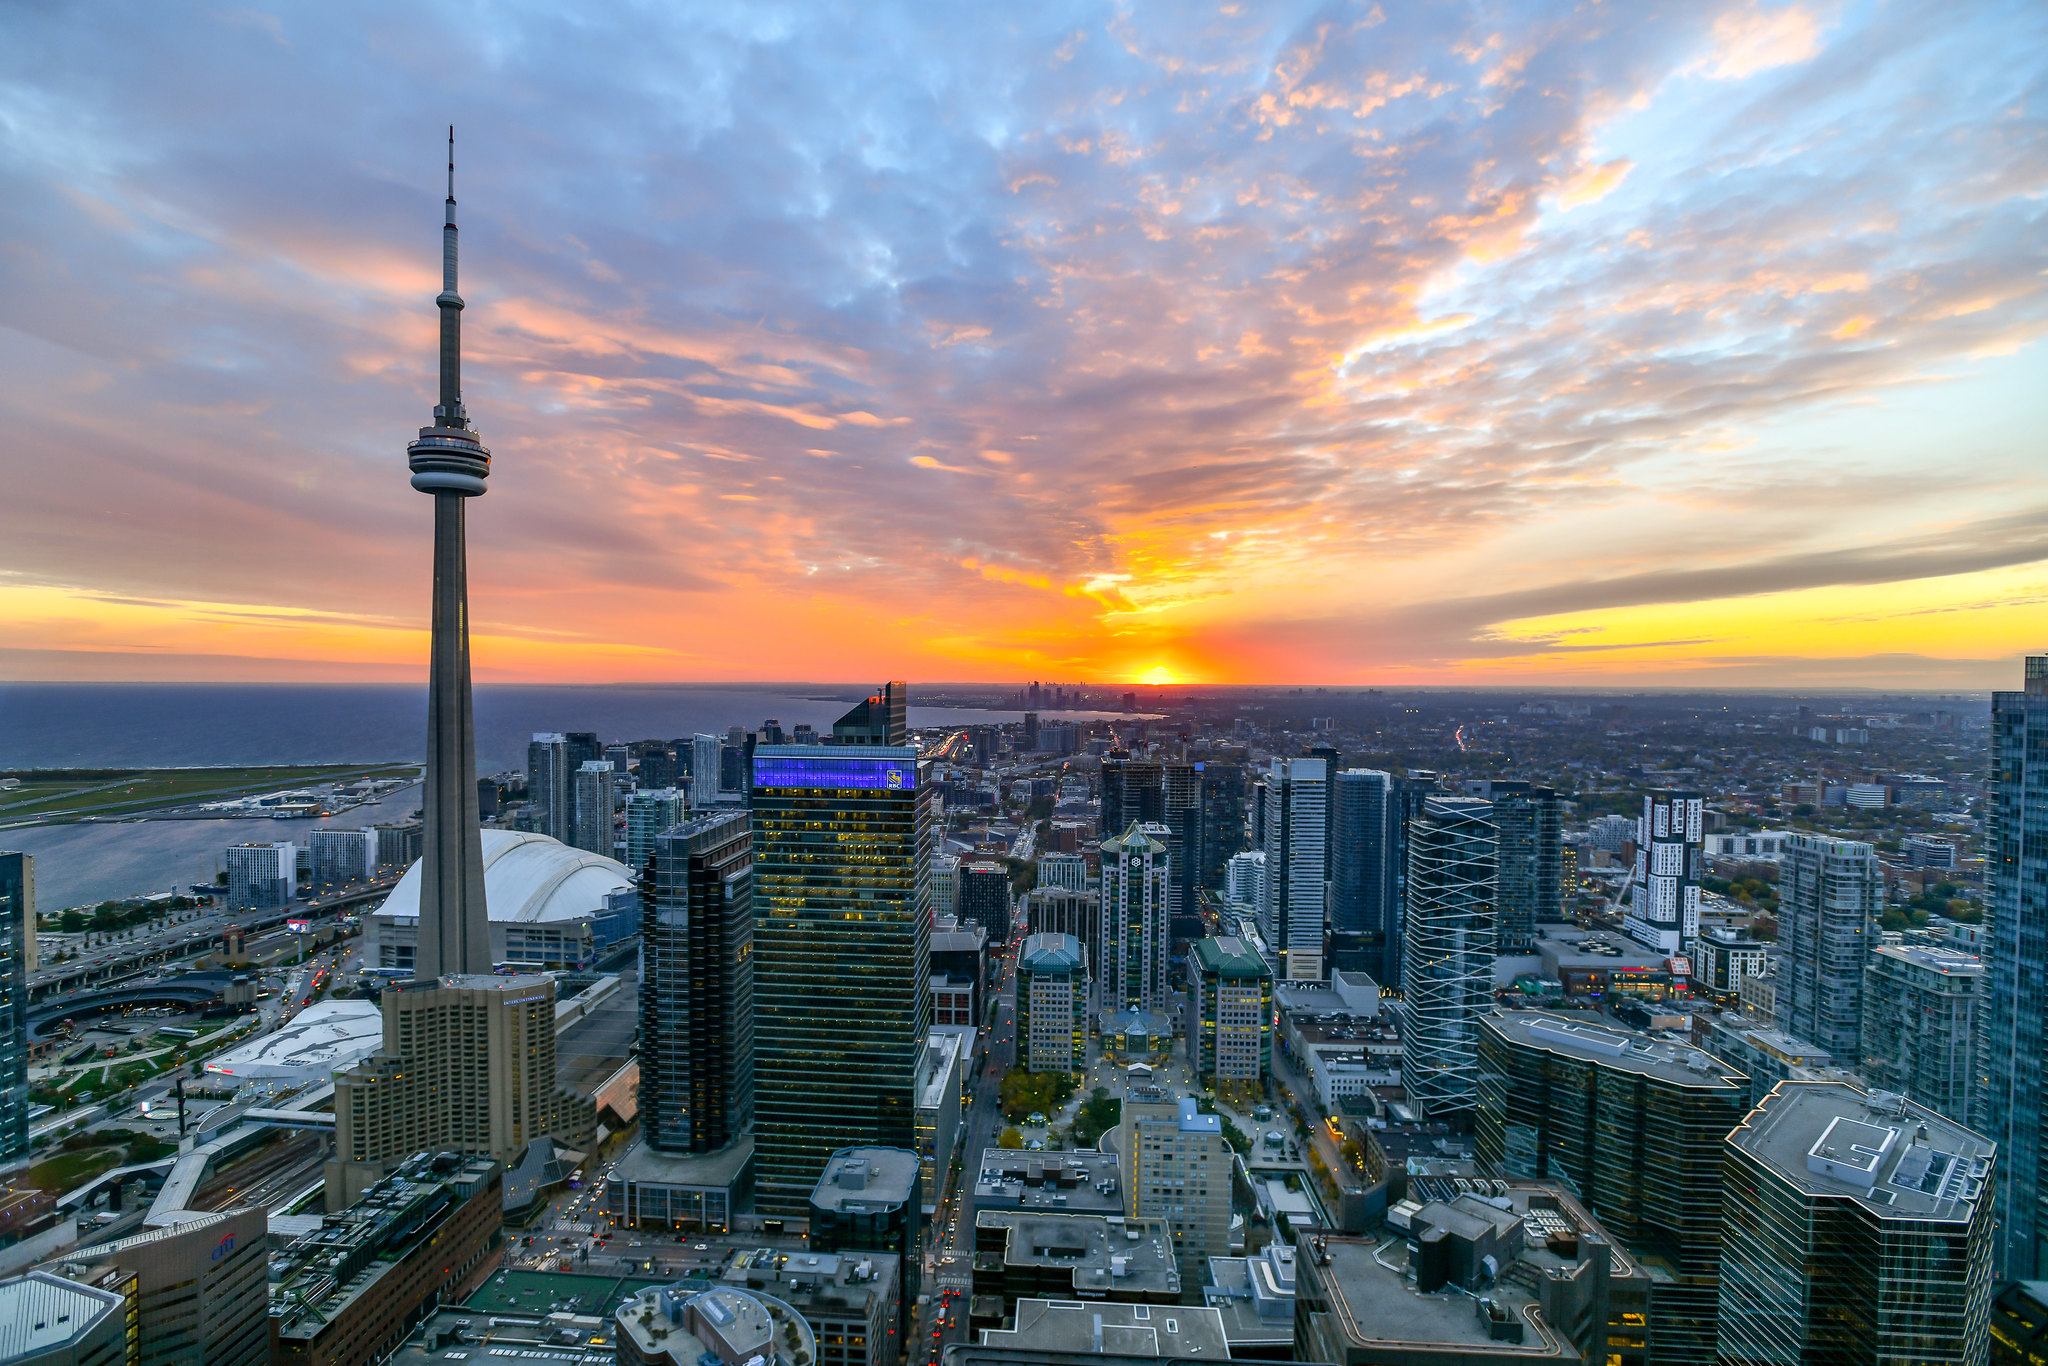 Toronto skyline at dusk with view of CN Tower and Lake Ontario.